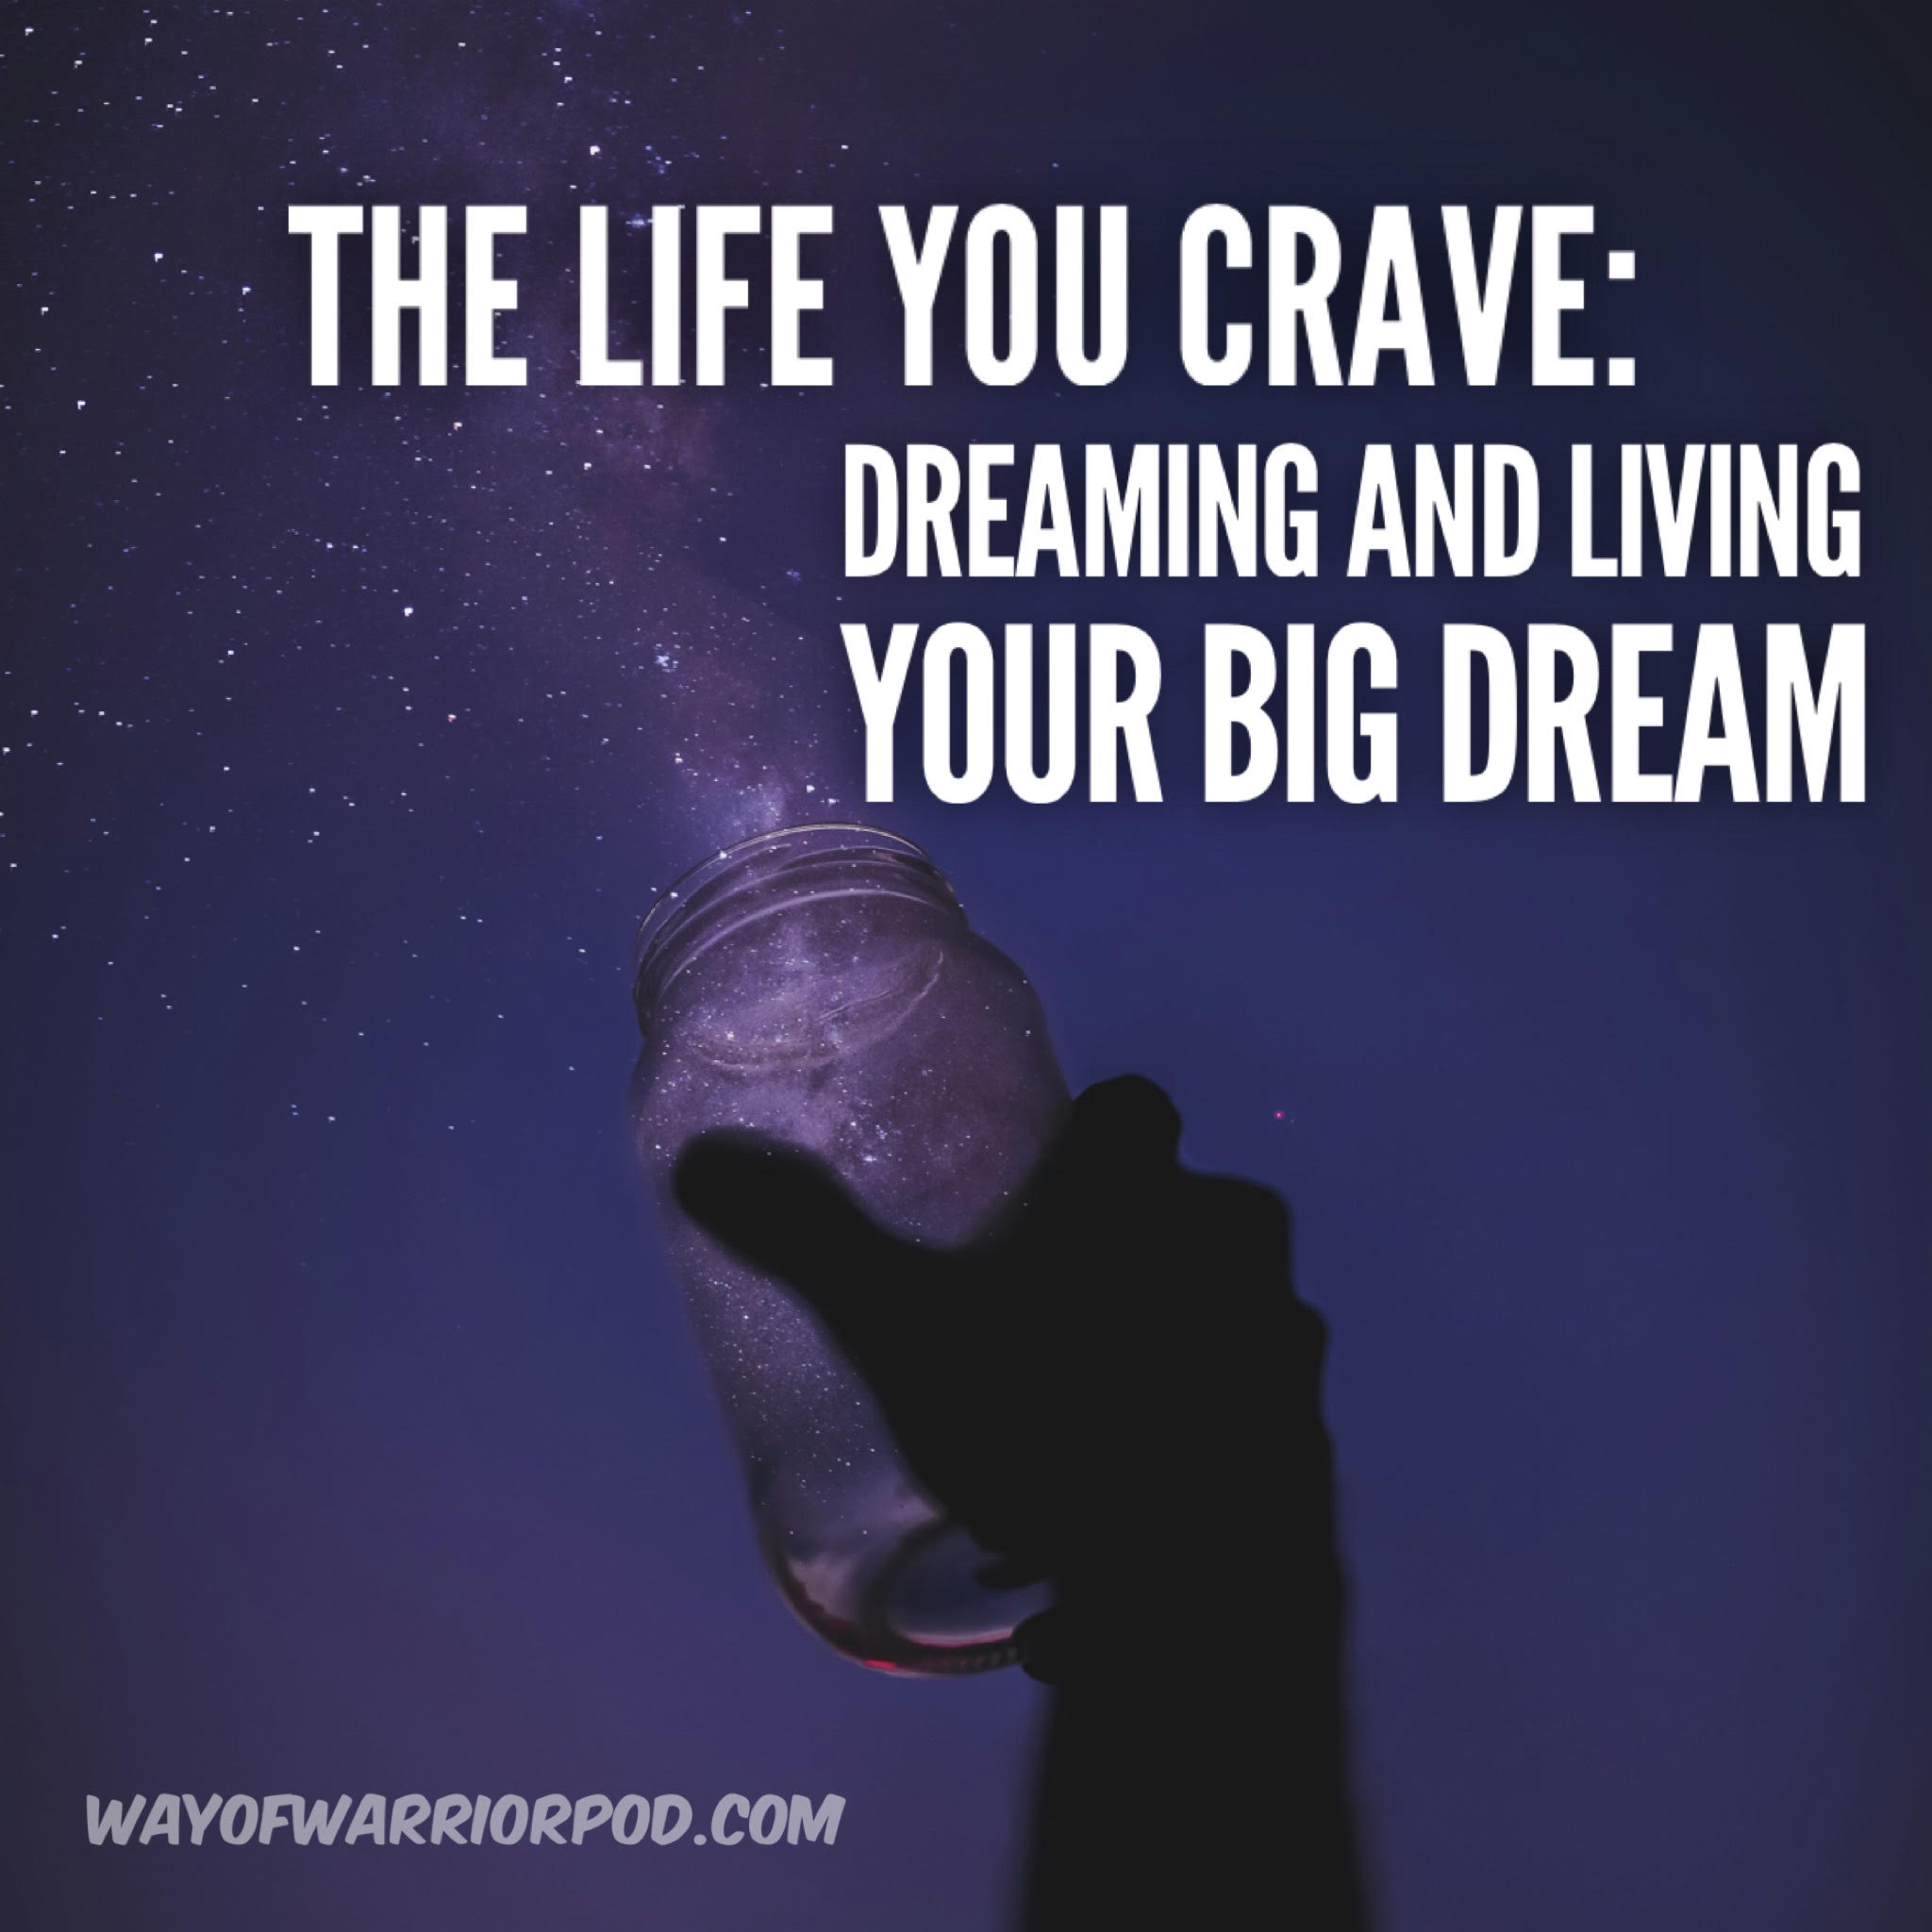 The Life You Crave: Dreaming and Living YOUR Big Dream